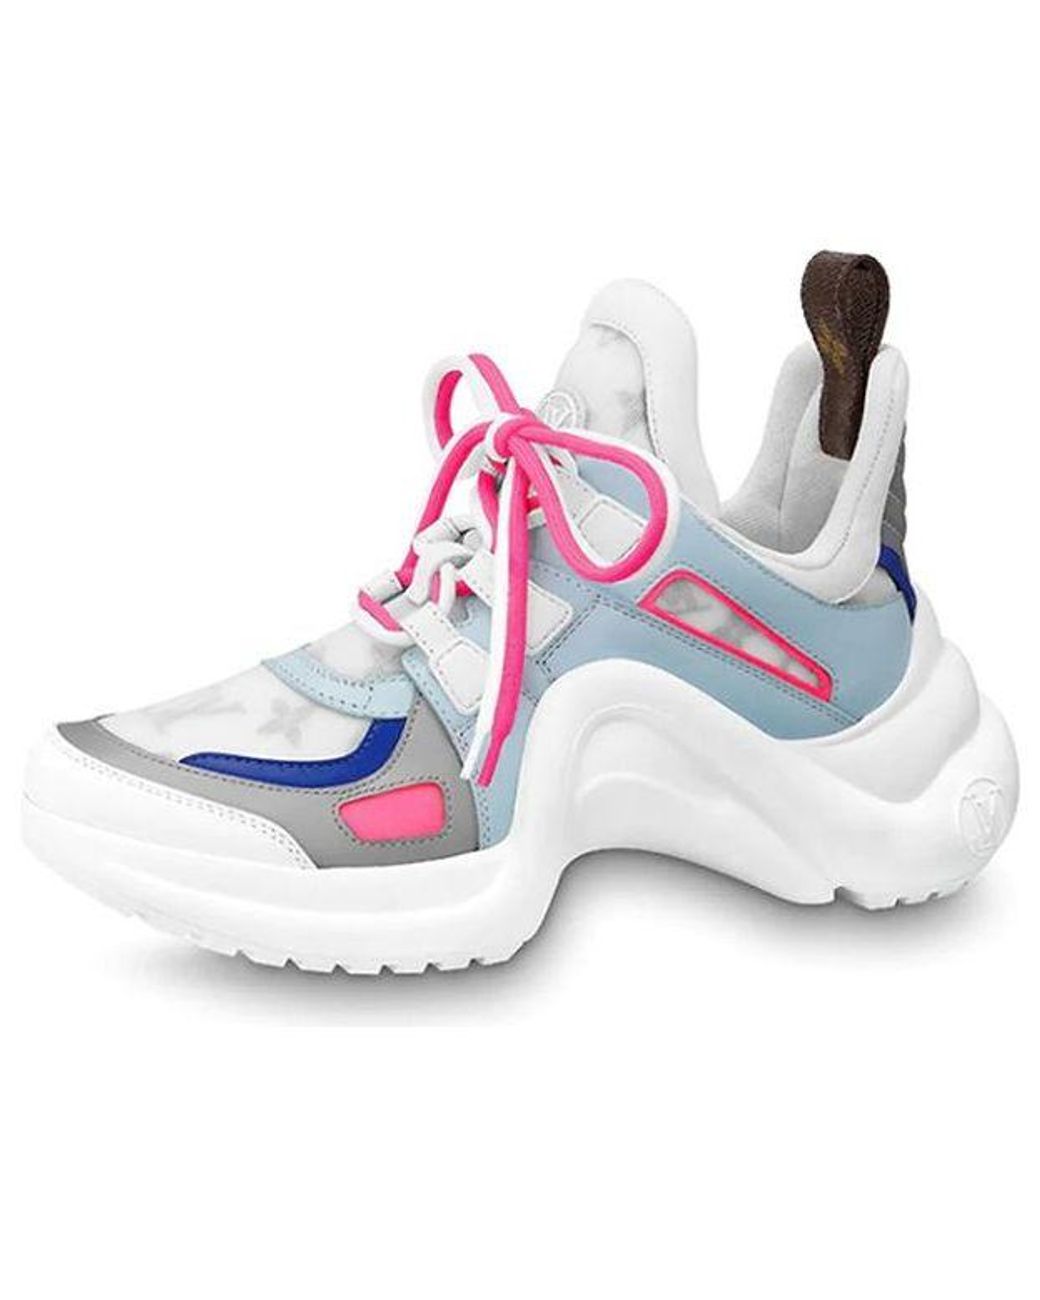 Louis Vuitton Arc Light Line Sneakers Pink White By Color US 8 Mix